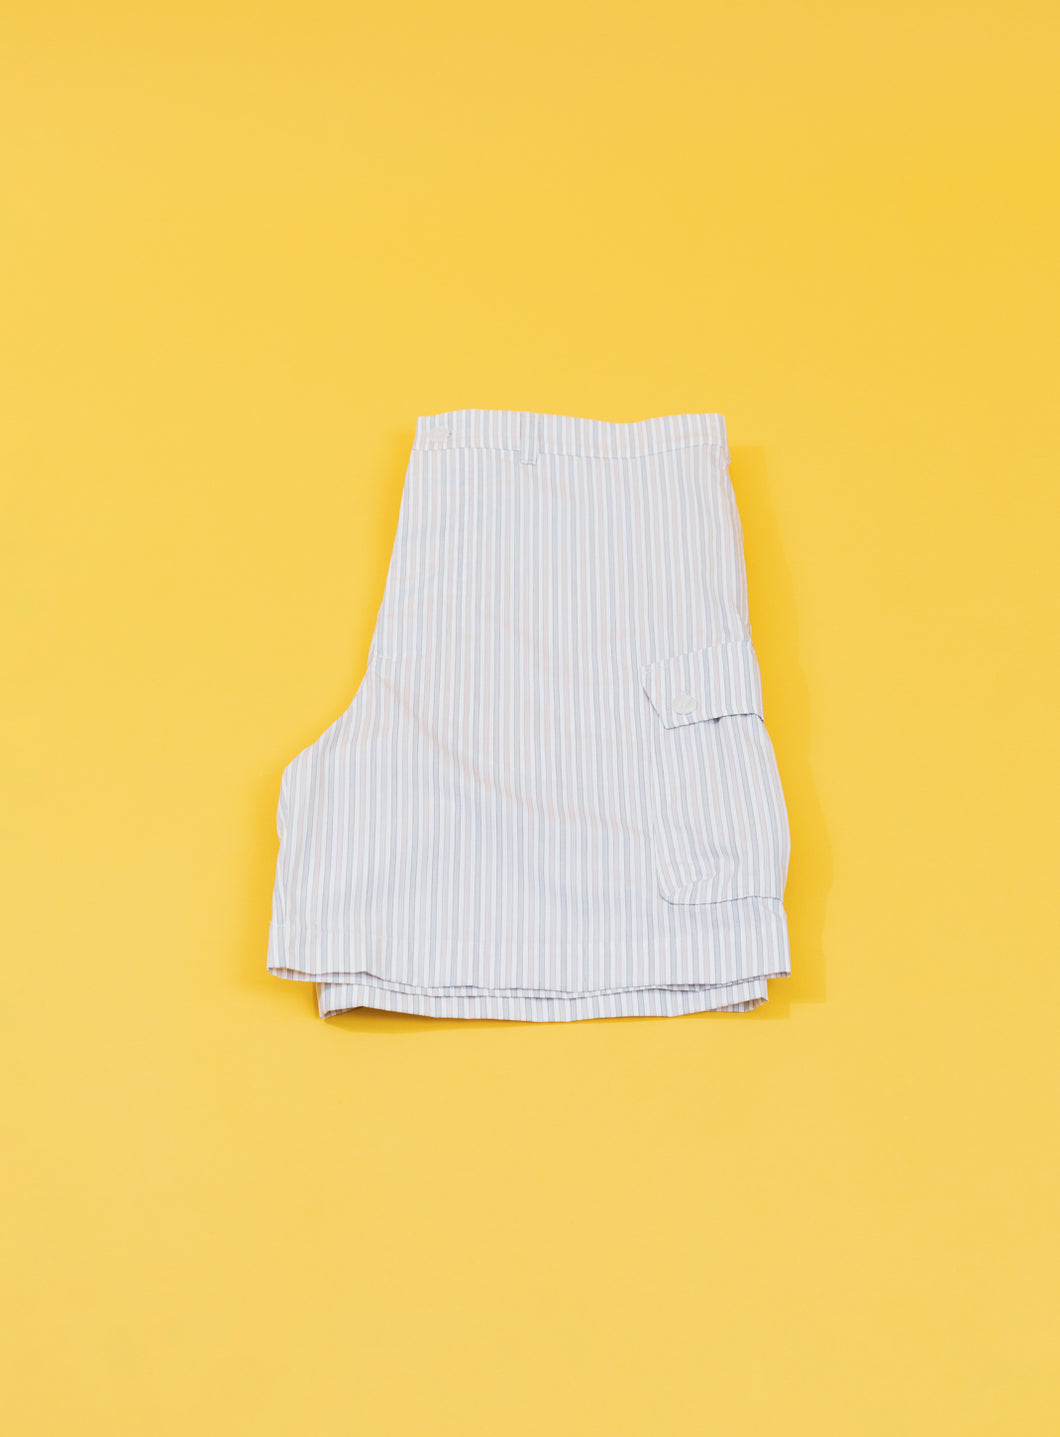 Bermuda Shorts with Envelope Pockets in White Poplin with Beige & Grey Stripes